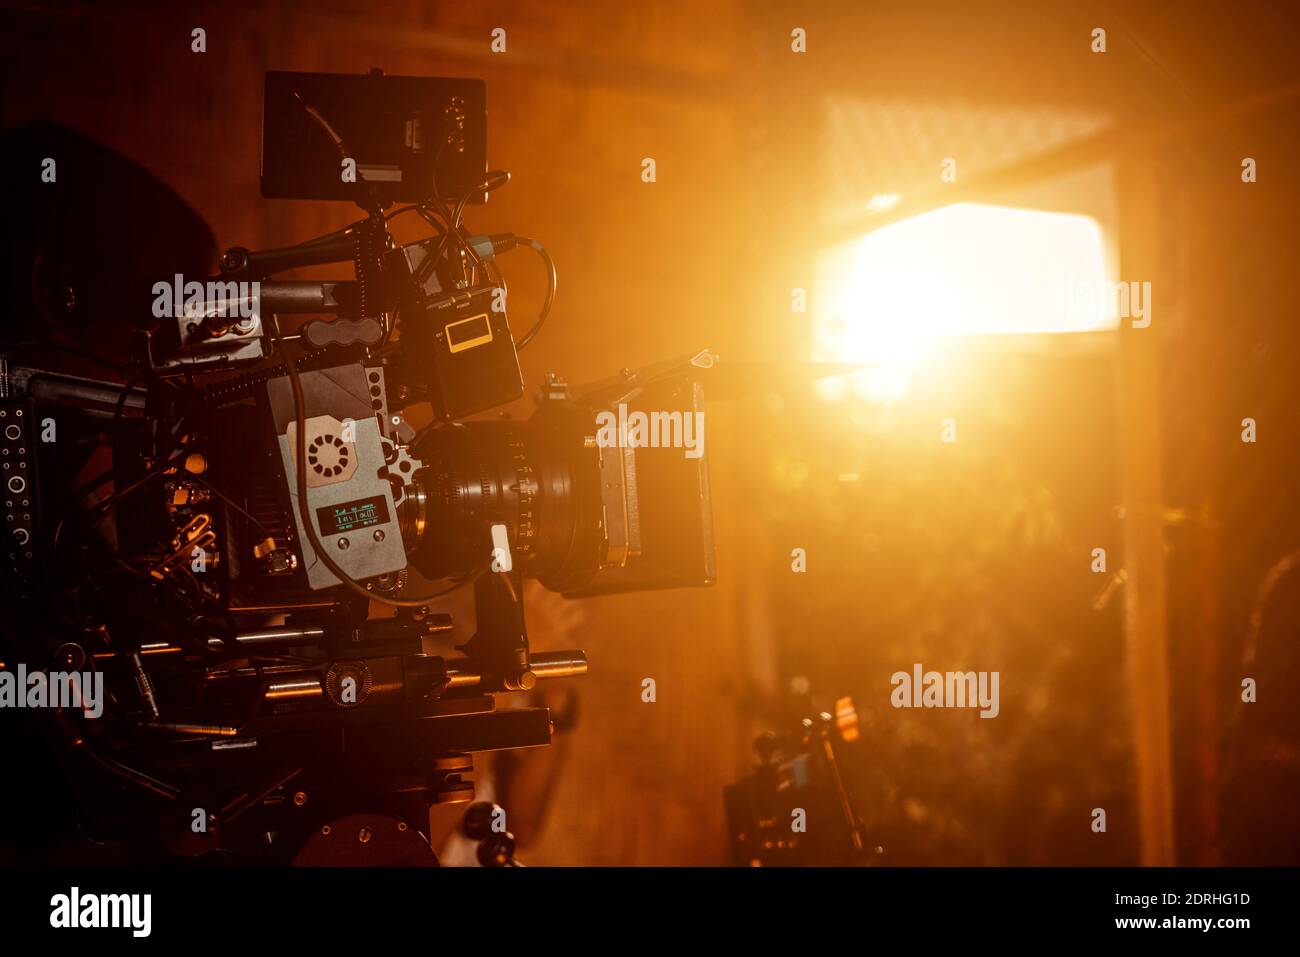 The filmmaker's camera film set behind the scenes of the movie and lighting. Stock Photo